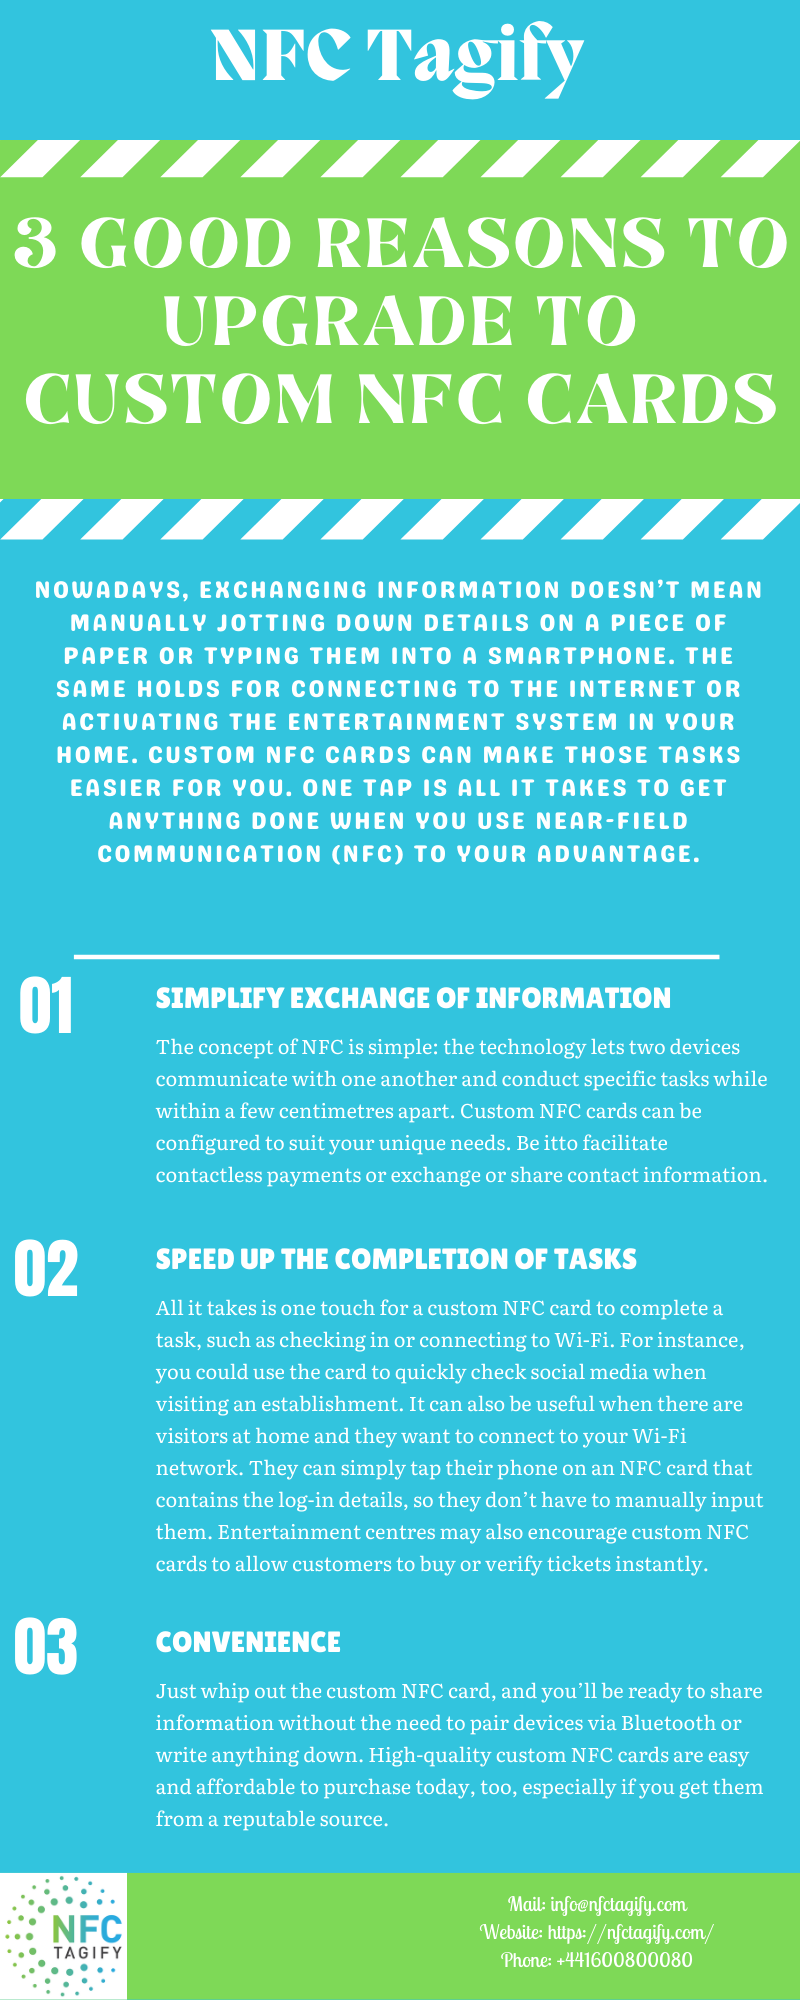 3 Good Reasons to Upgrade to Custom NFC Cards.png  by nfctagify